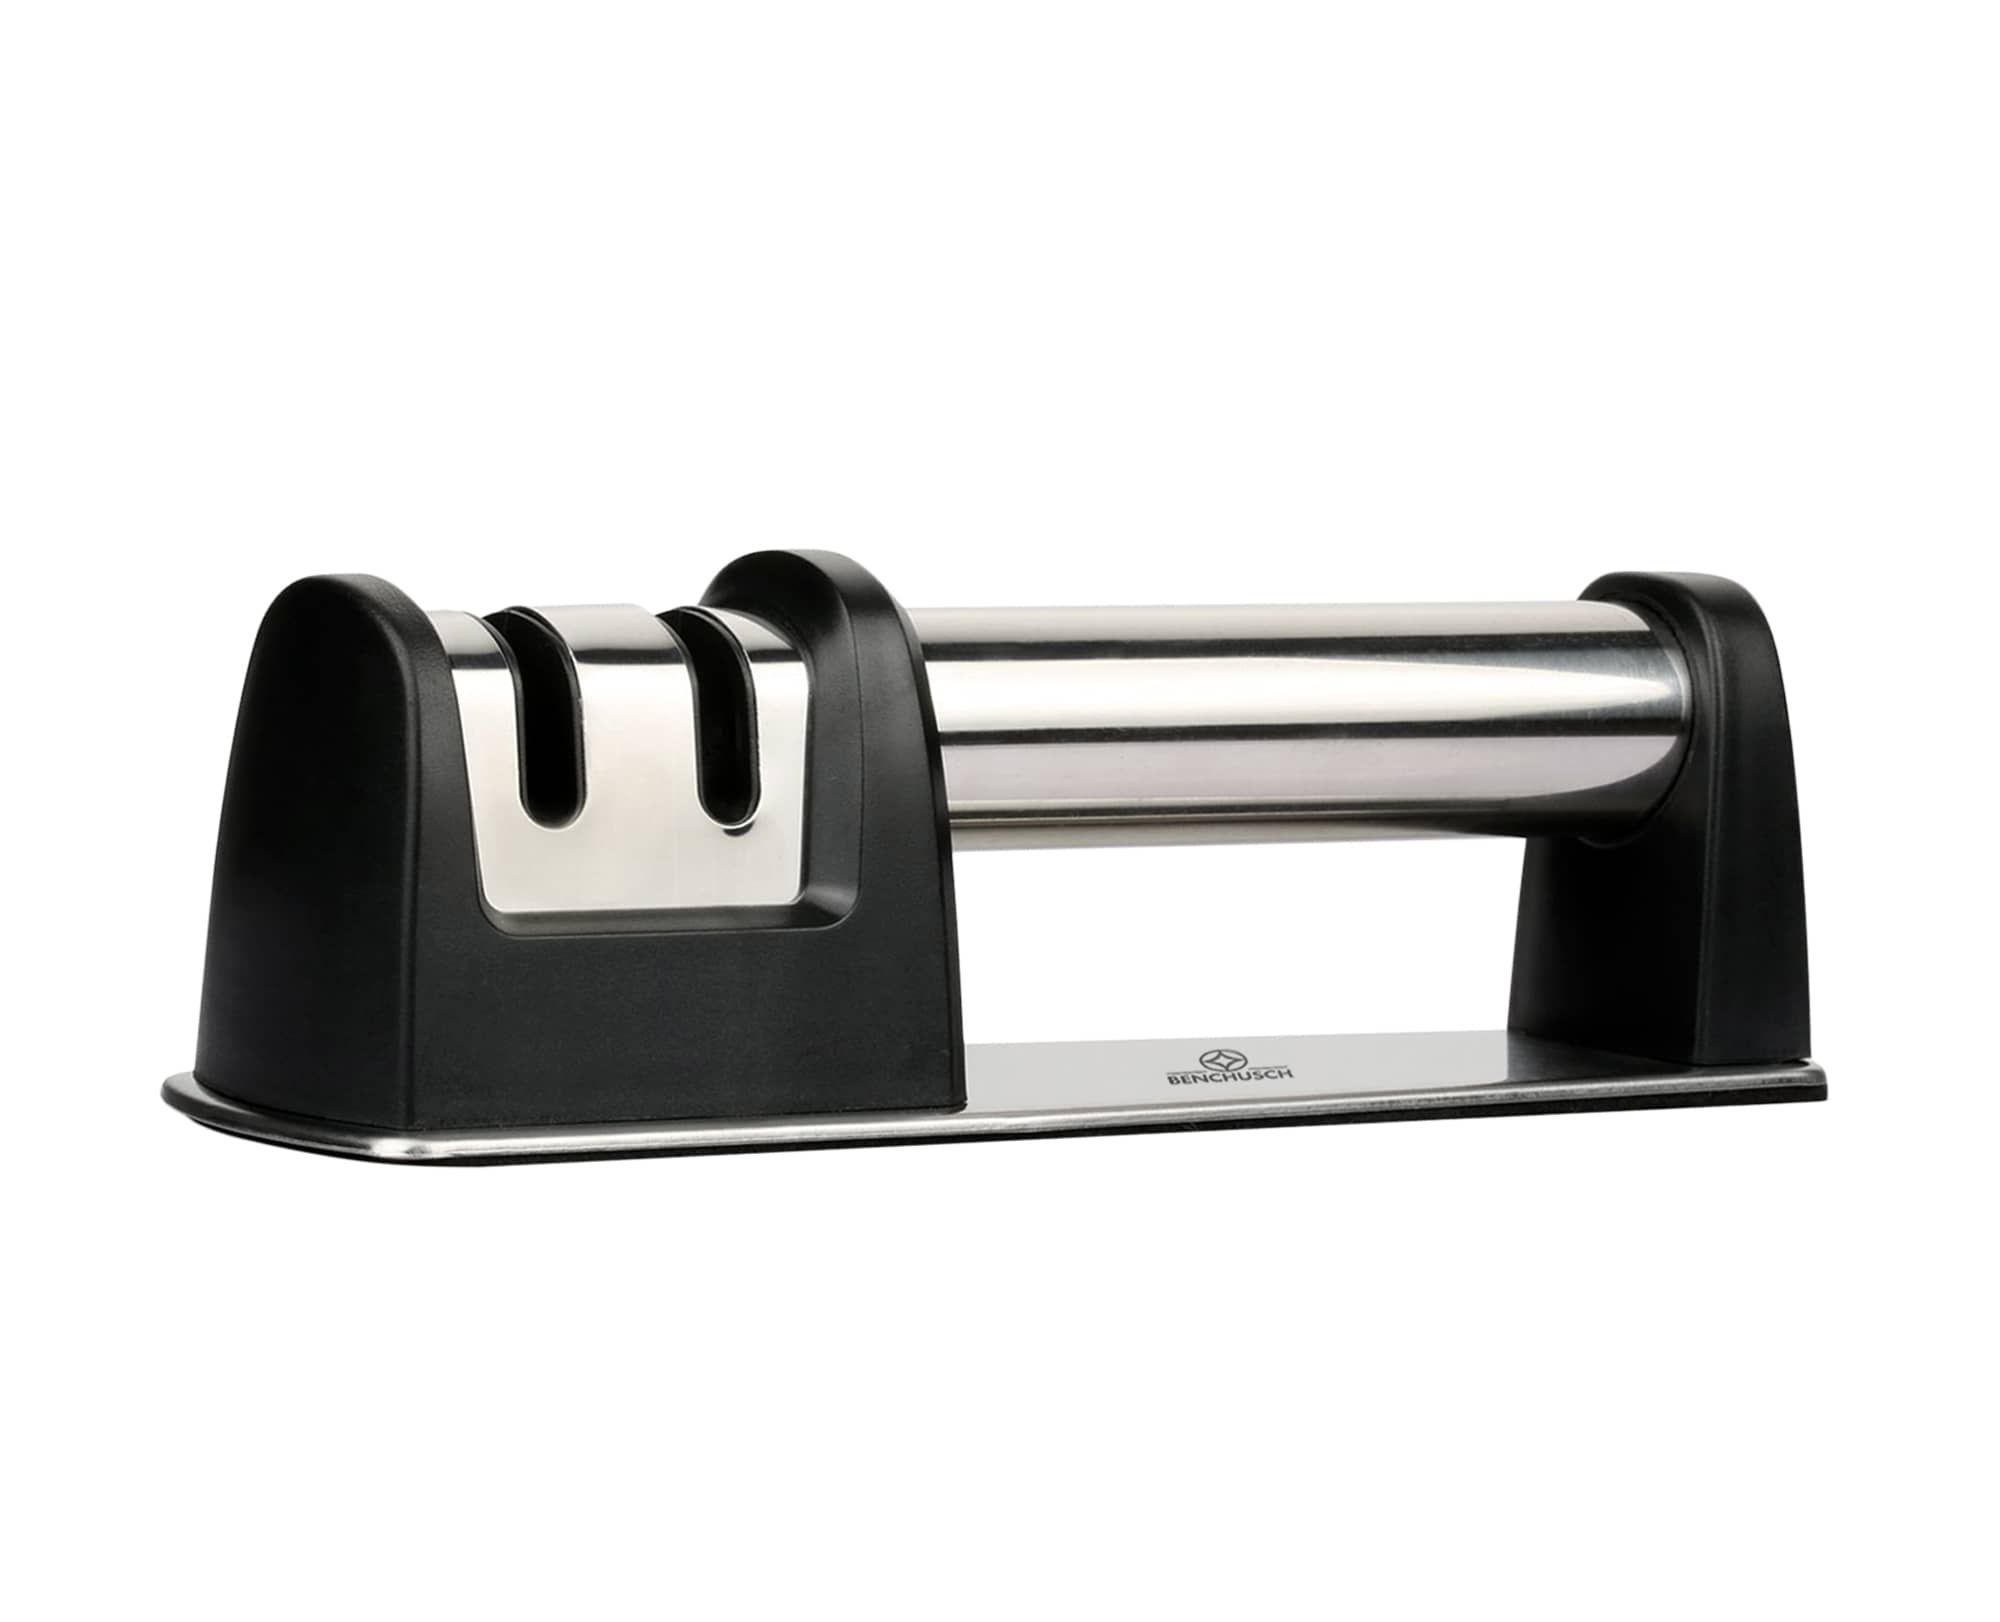 Benchusch Two-Stage Knife Sharpener with non-slip base, ABS body and Stainless Steel handle, black color